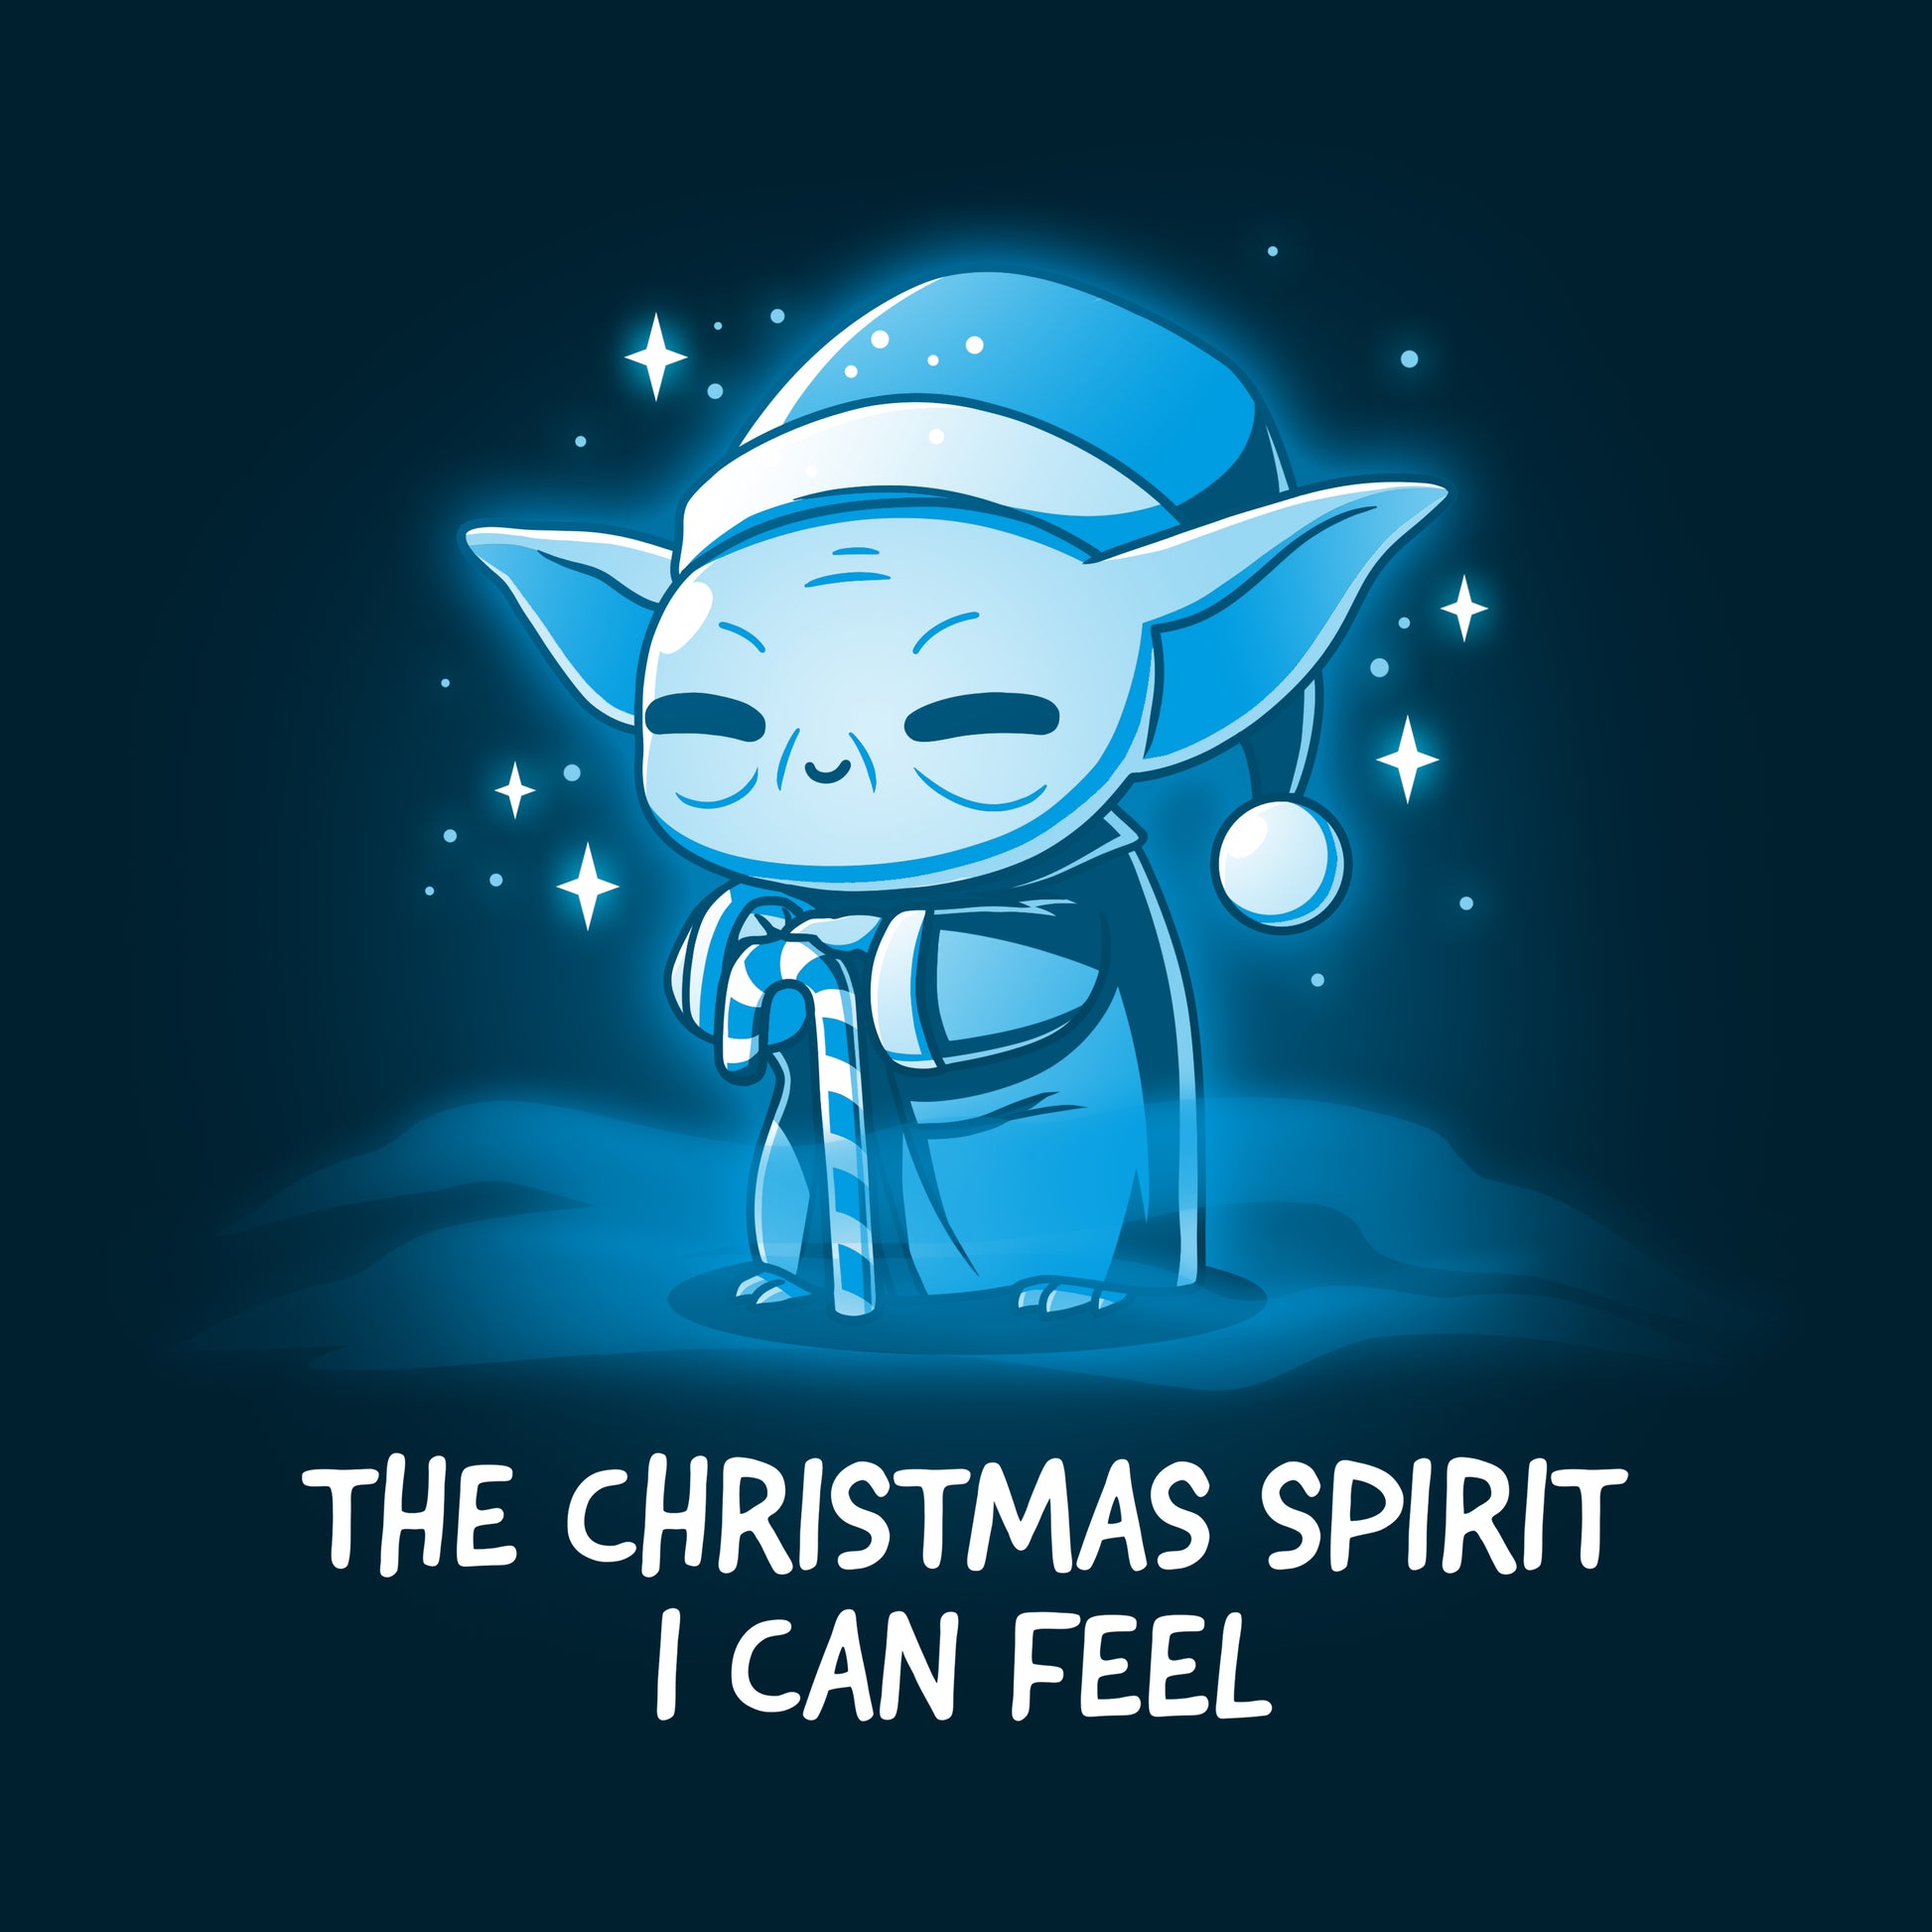 The officially licensed Star Wars Christmas spirit I can feel.